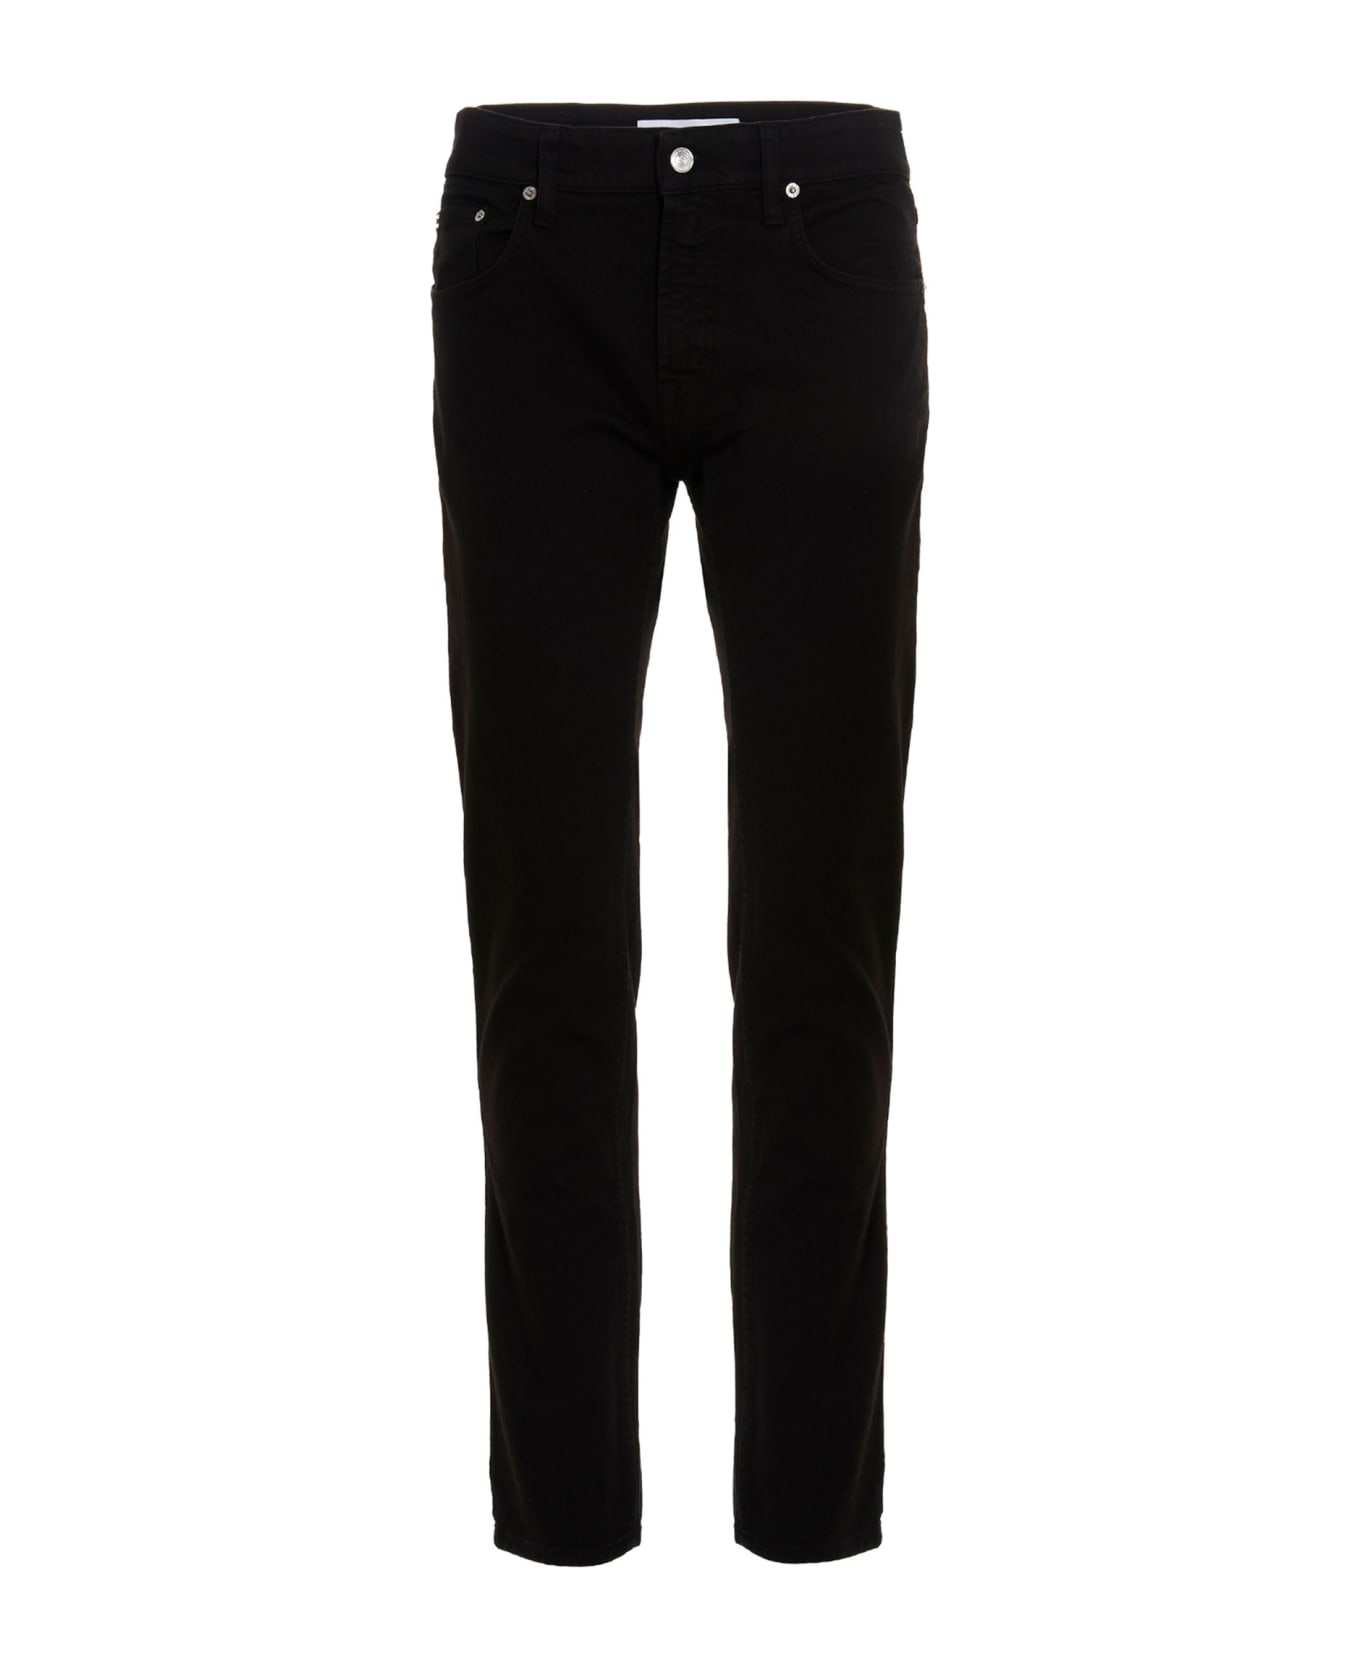 Department Five 'skeith' Jeans - Black  